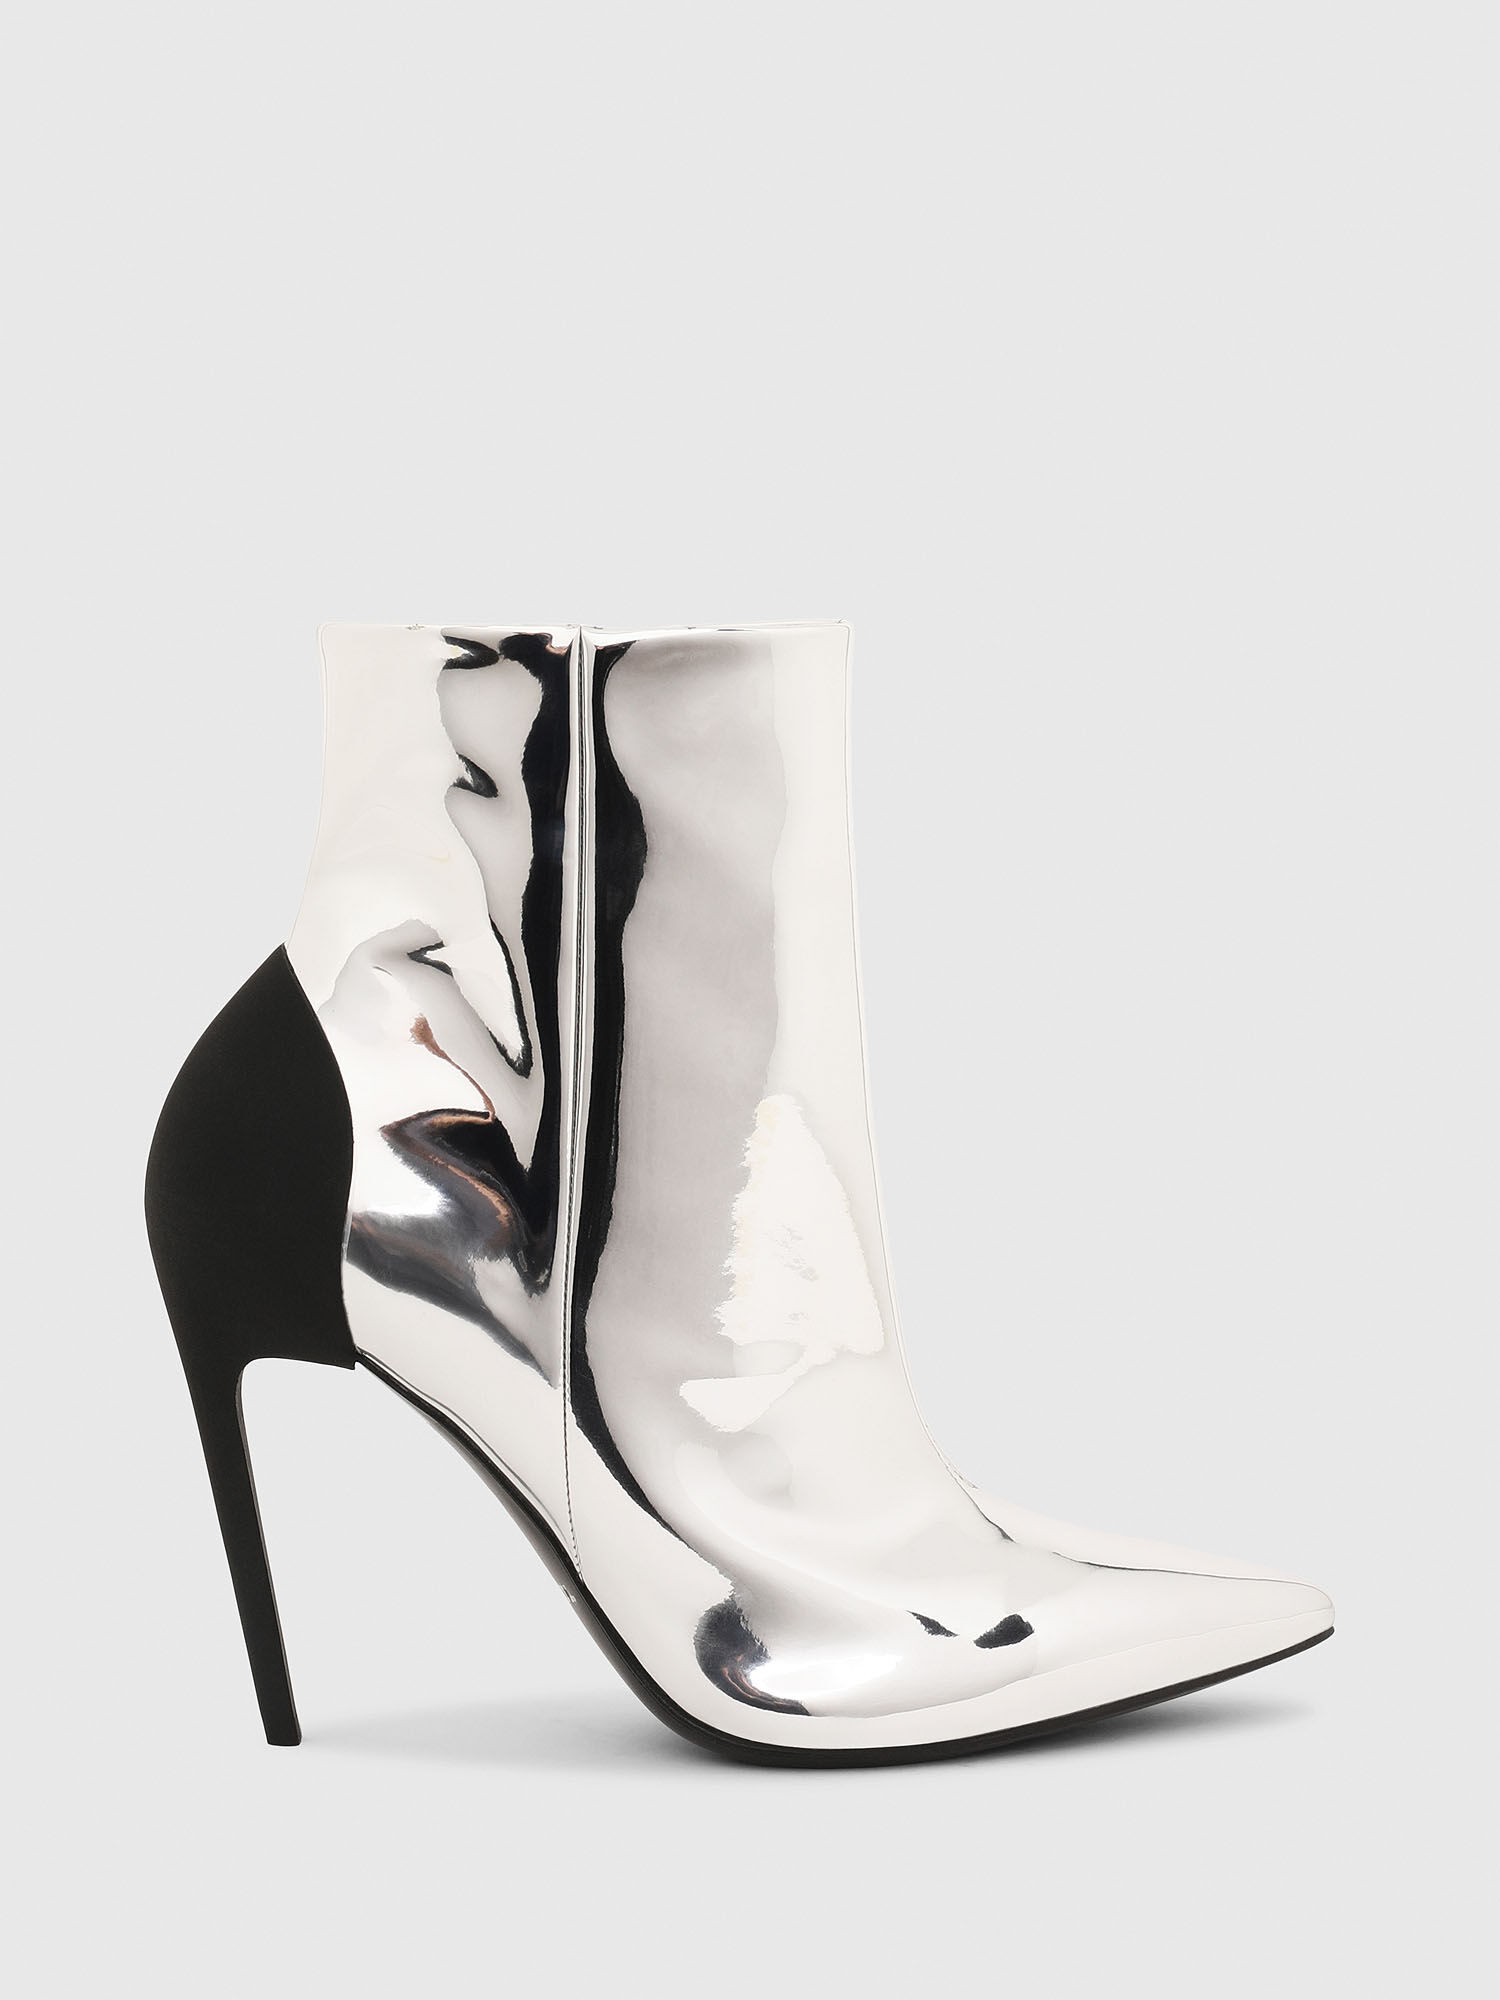 silver shoe boots uk